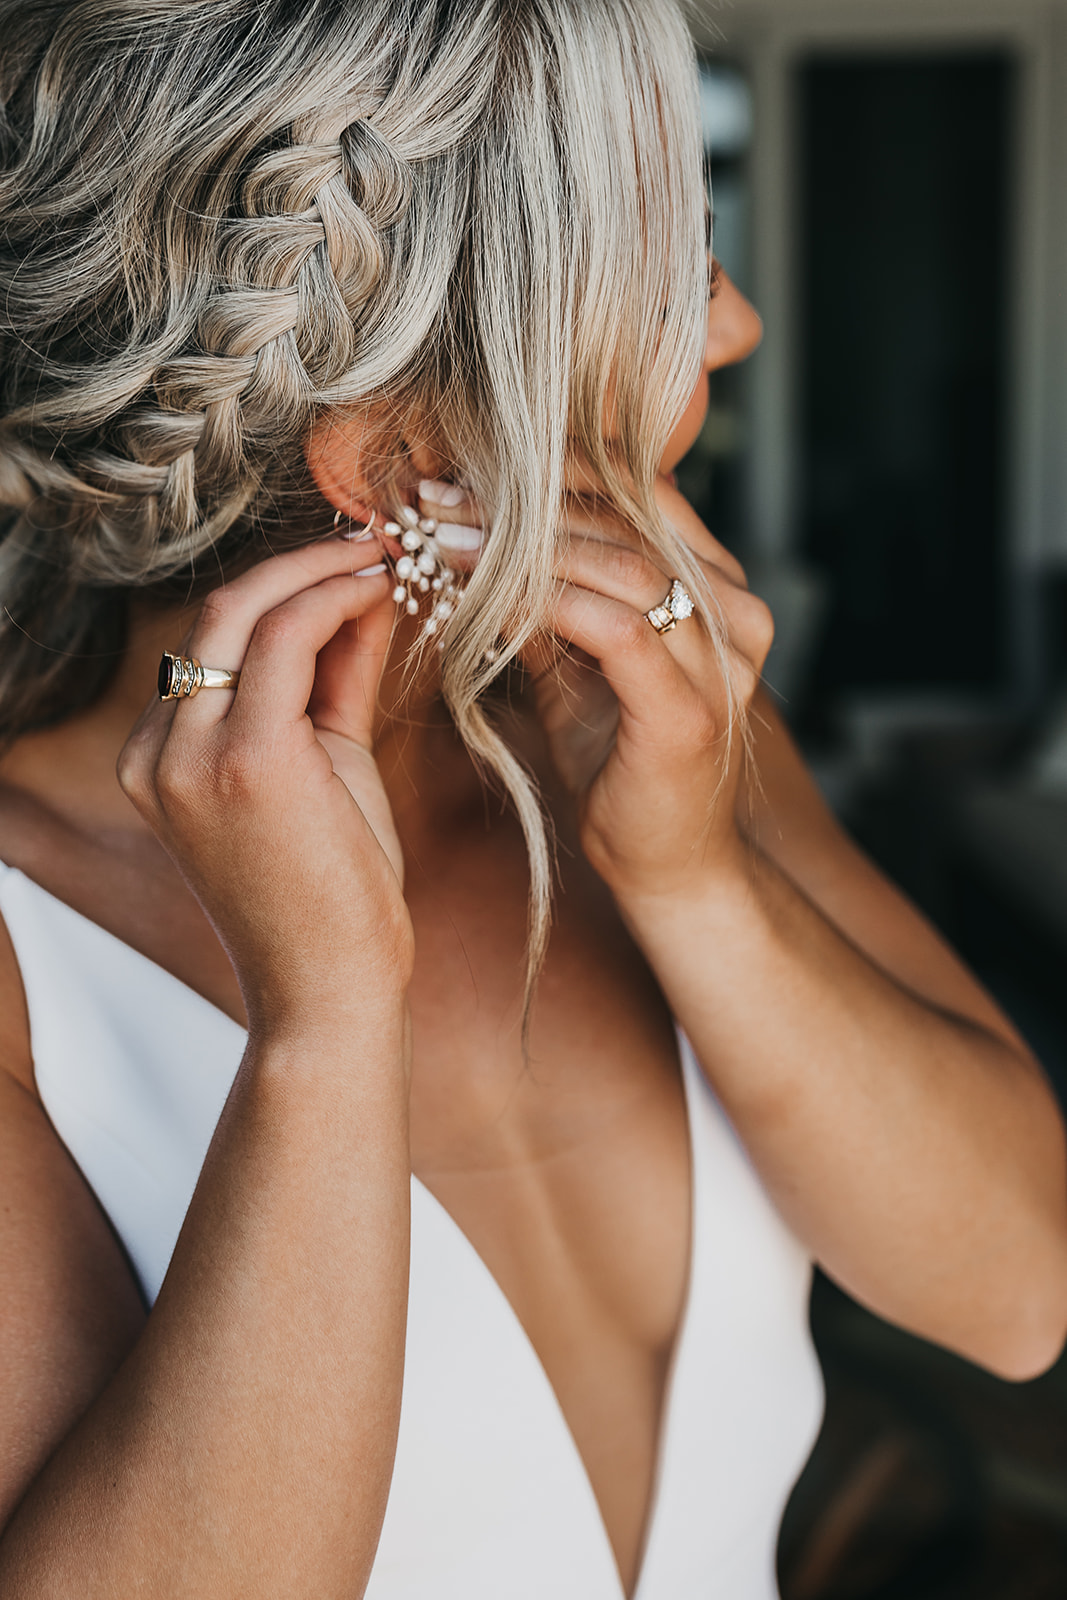 Bride putting on the finishing touches of jewelry before wedding ceremony 